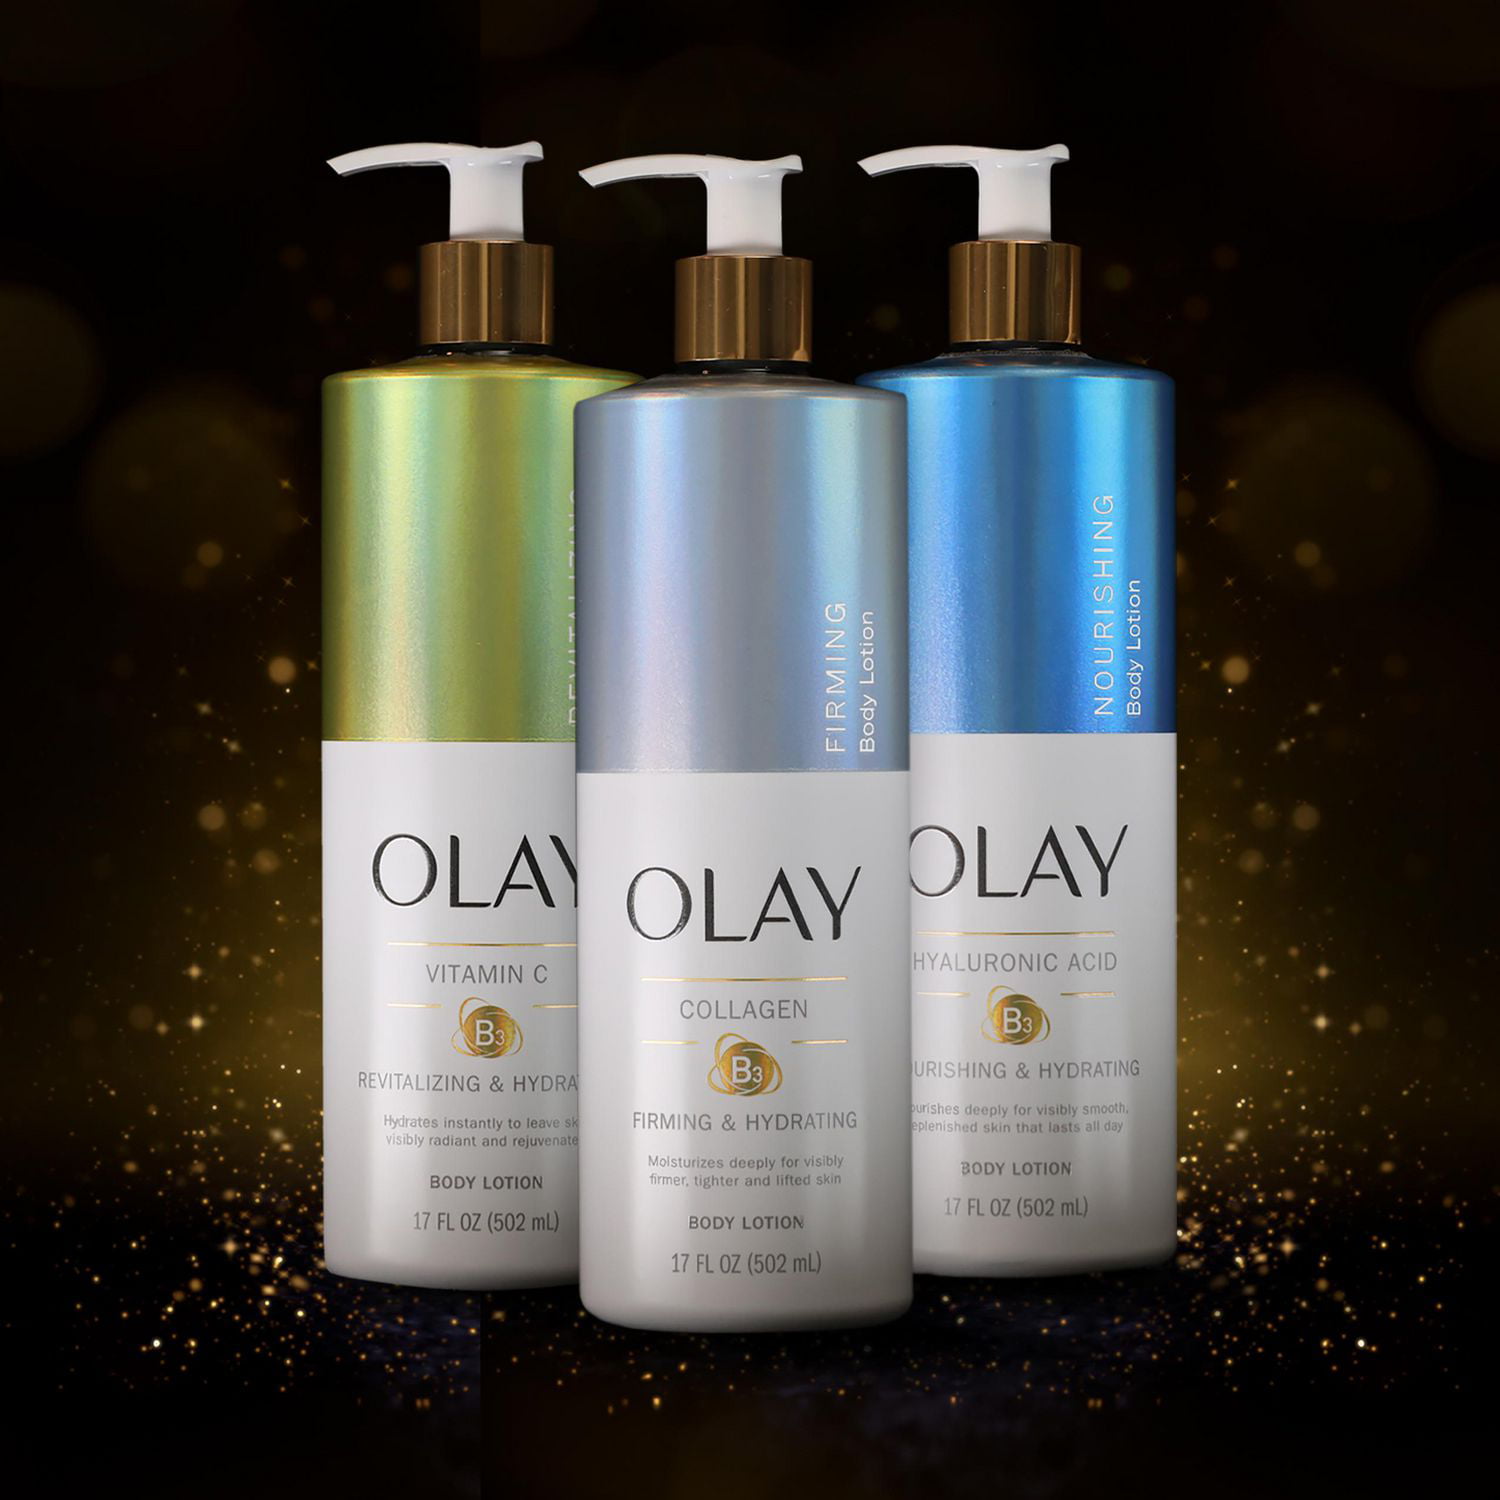 Olay Firming & Hydrating Body Lotion with Collagen, 502 mL Pump 